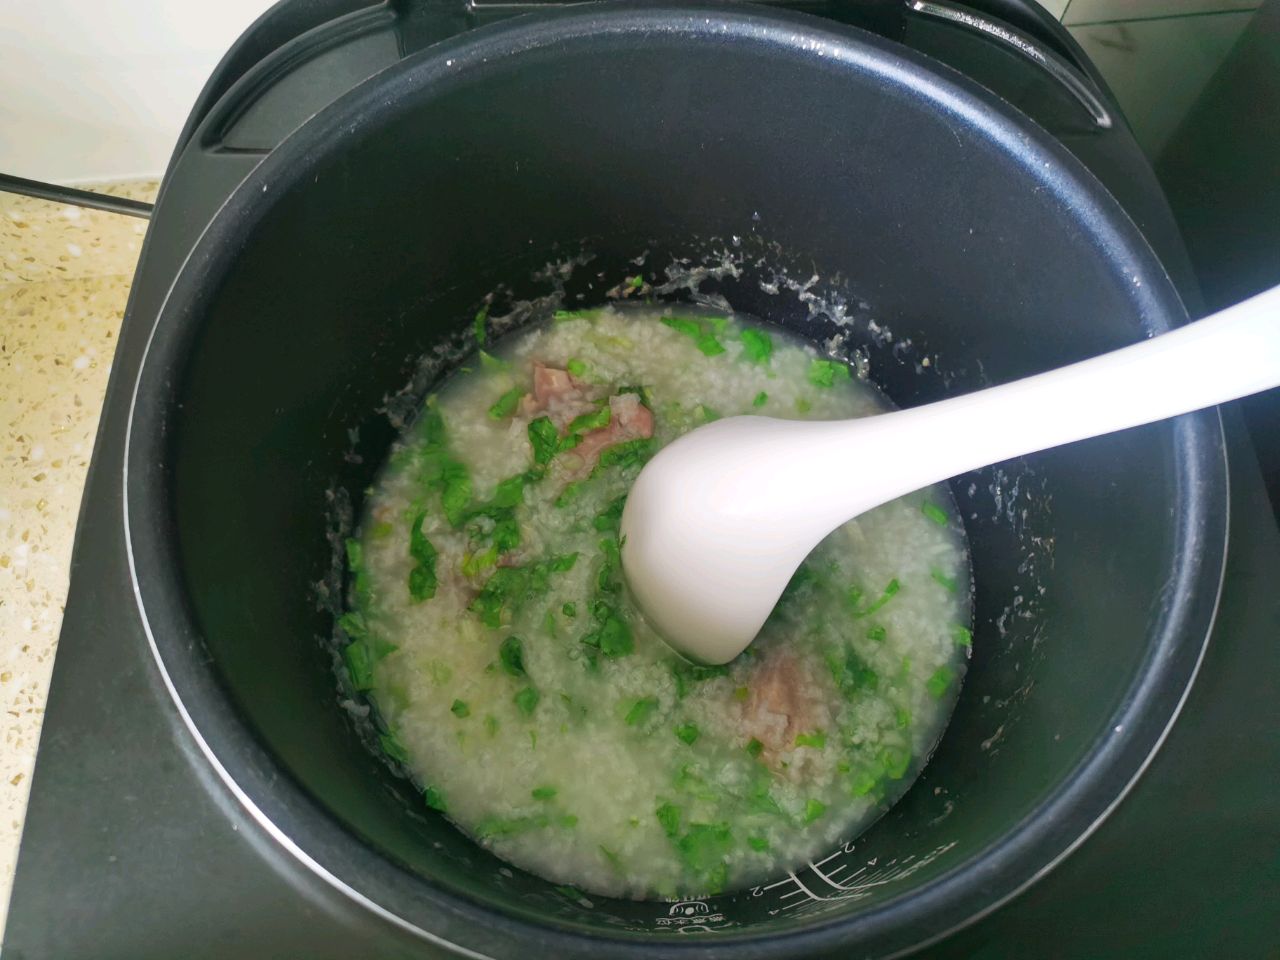 A taste of memories -- Echo's Kitchen: 【咸排骨花生粥】Salted Ribs and Peanut Congee